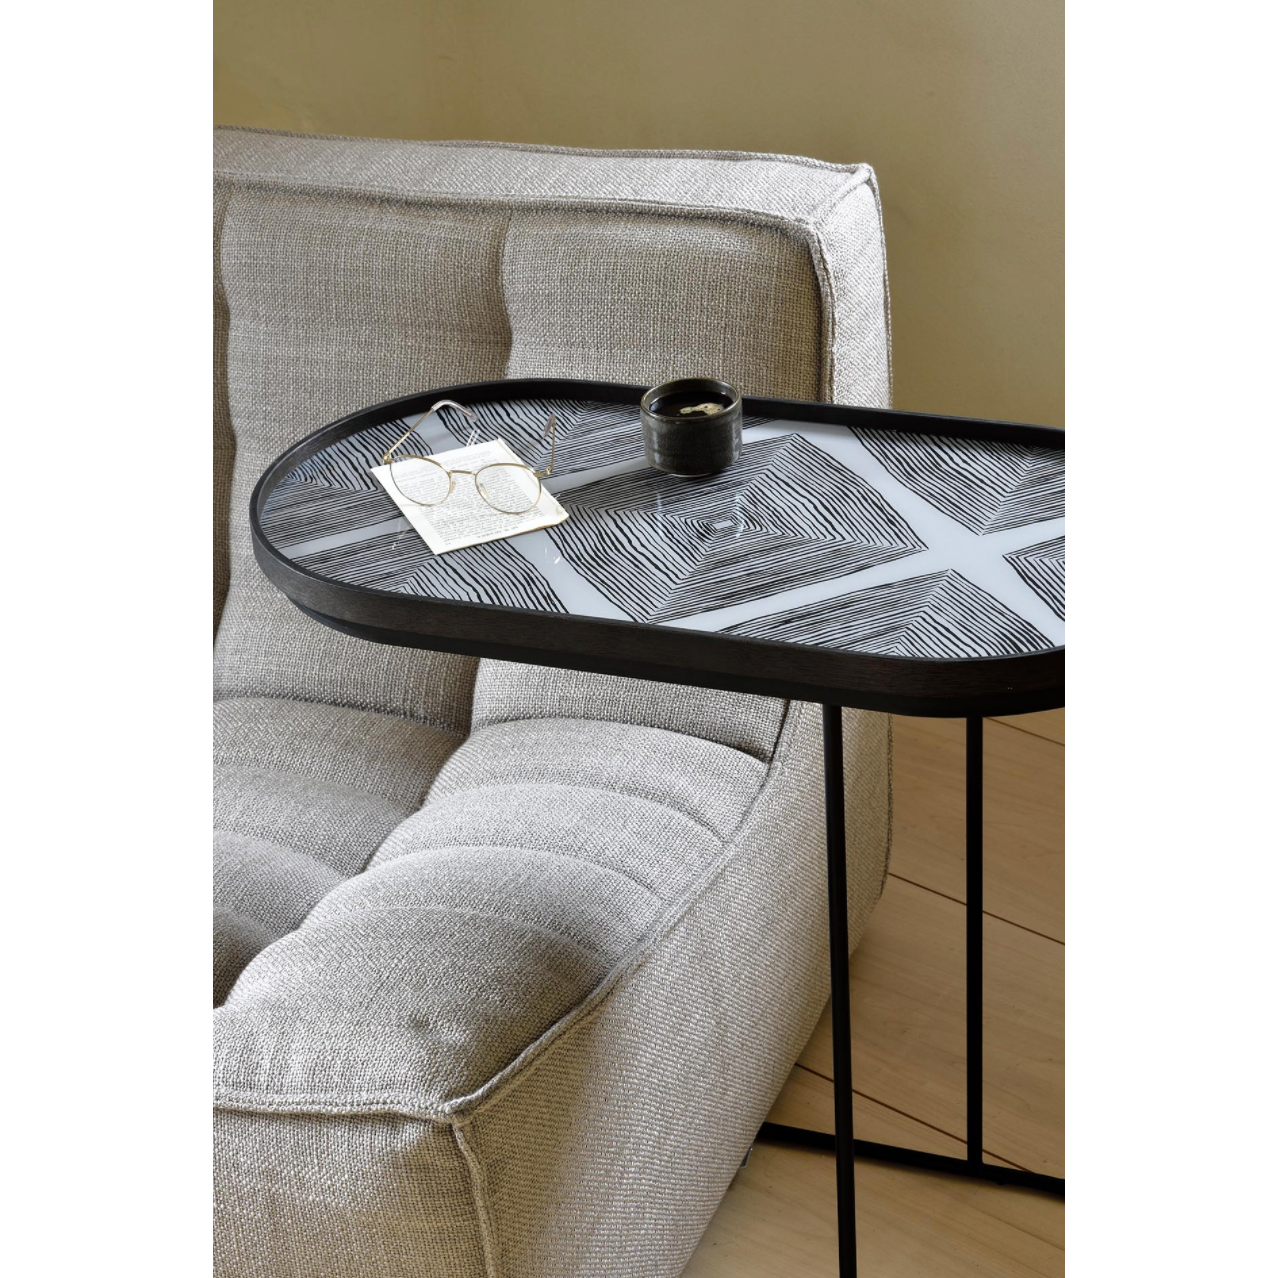 We love that this Oblong Tray Side Table has the ability to adopt different trays to mix or match various colors and patterns, creating a personal piece that is uniquely yours!  Dimensions: 27.5"w x 13"d x 26"h   Material: Metal 